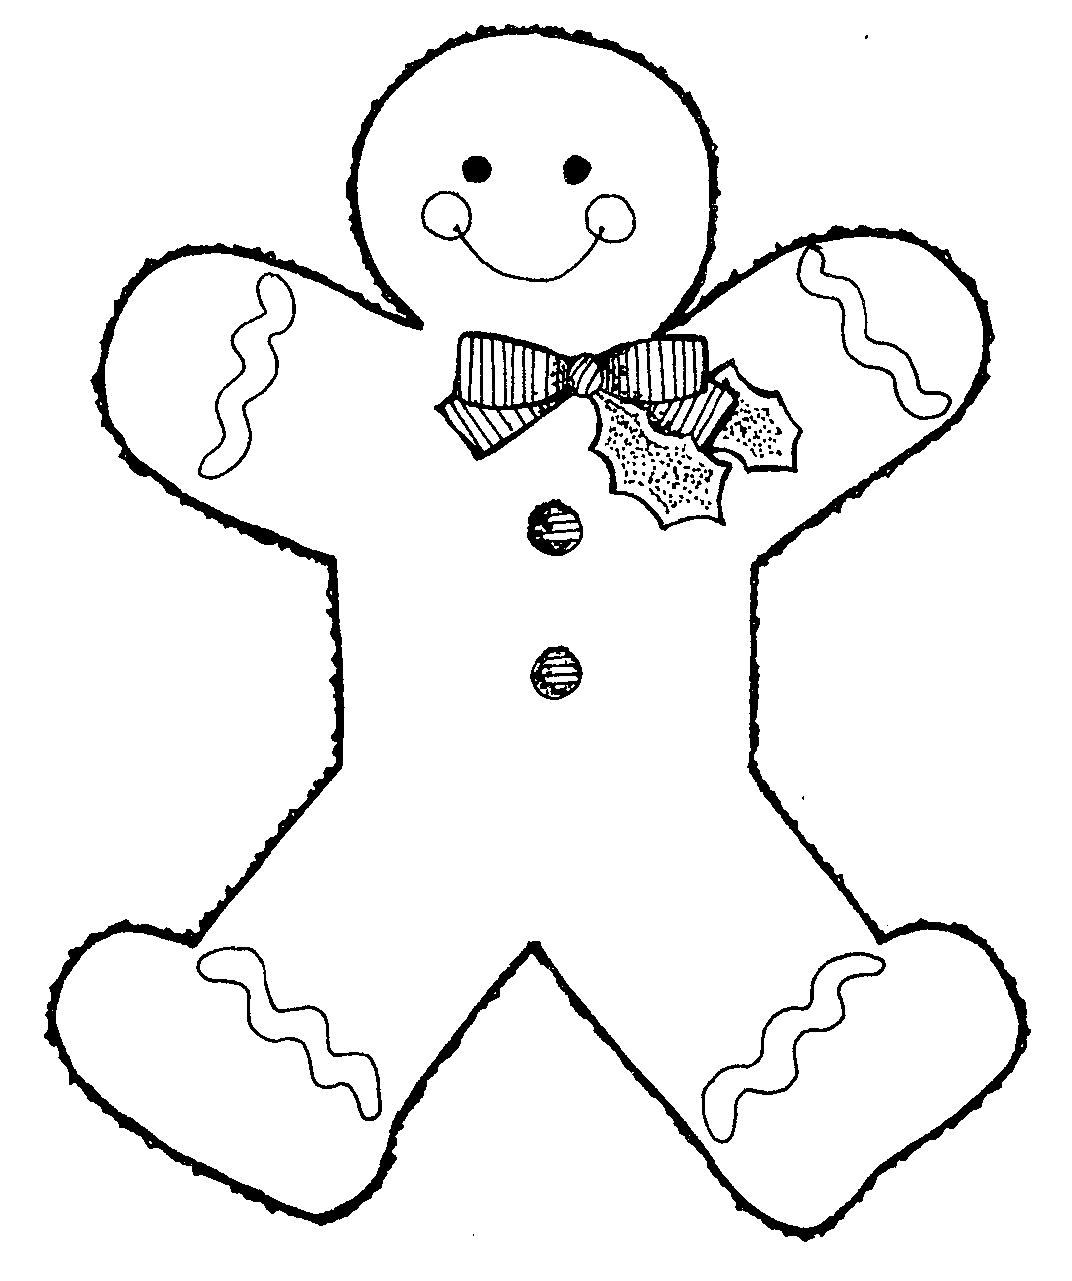 Gingerbread Man Clip Art Free - Clipart library